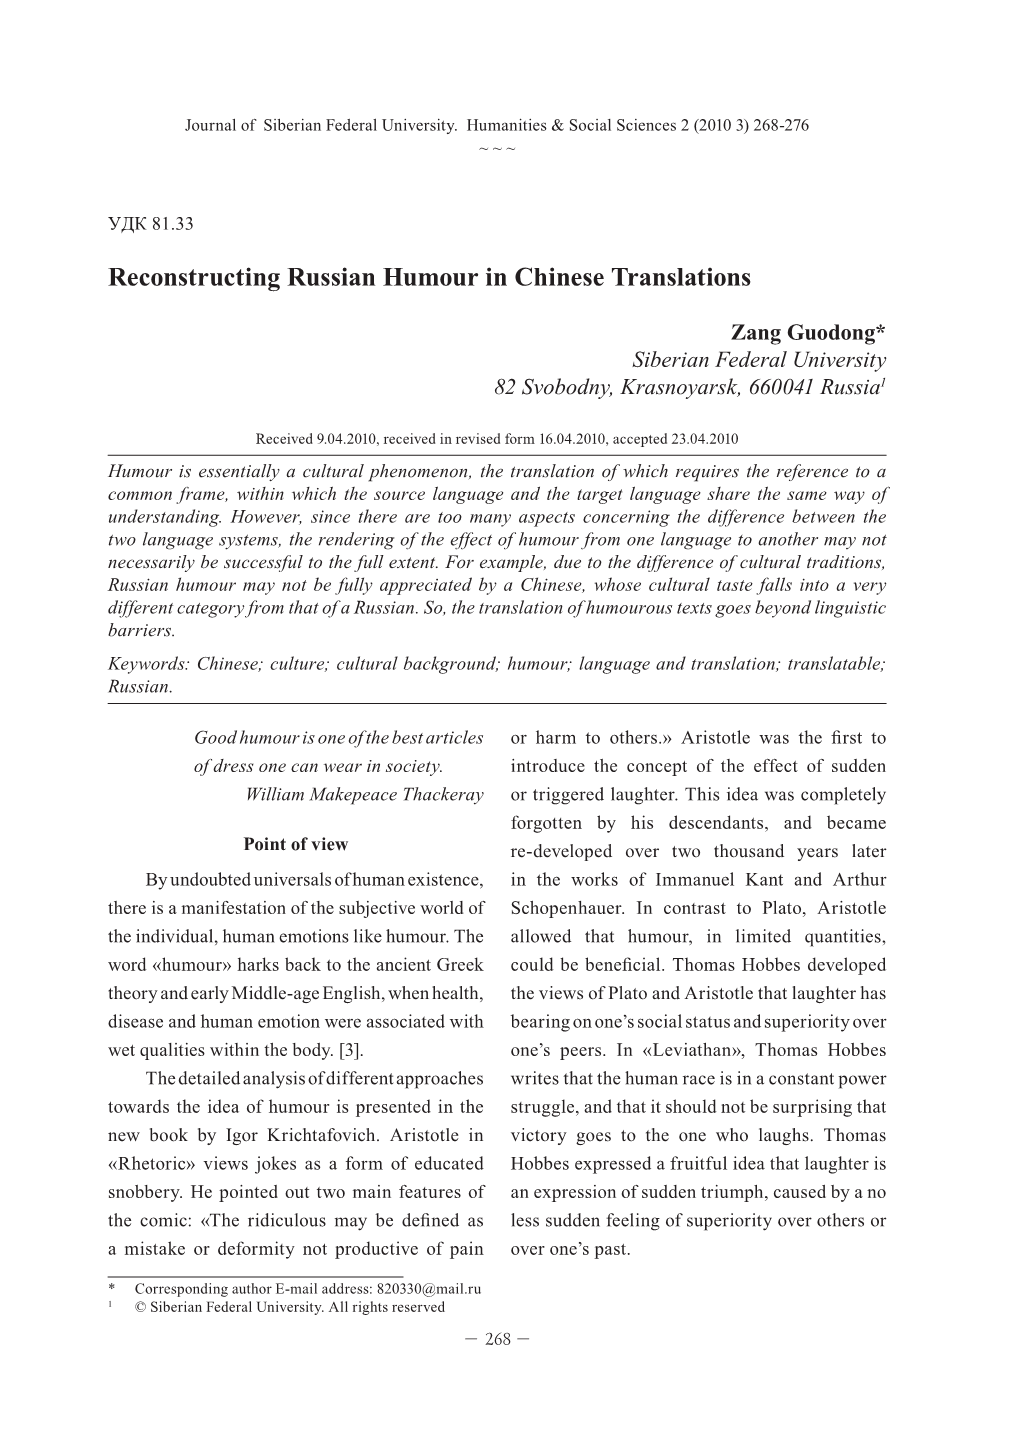 Reconstructing Russian Humour in Chinese Translations